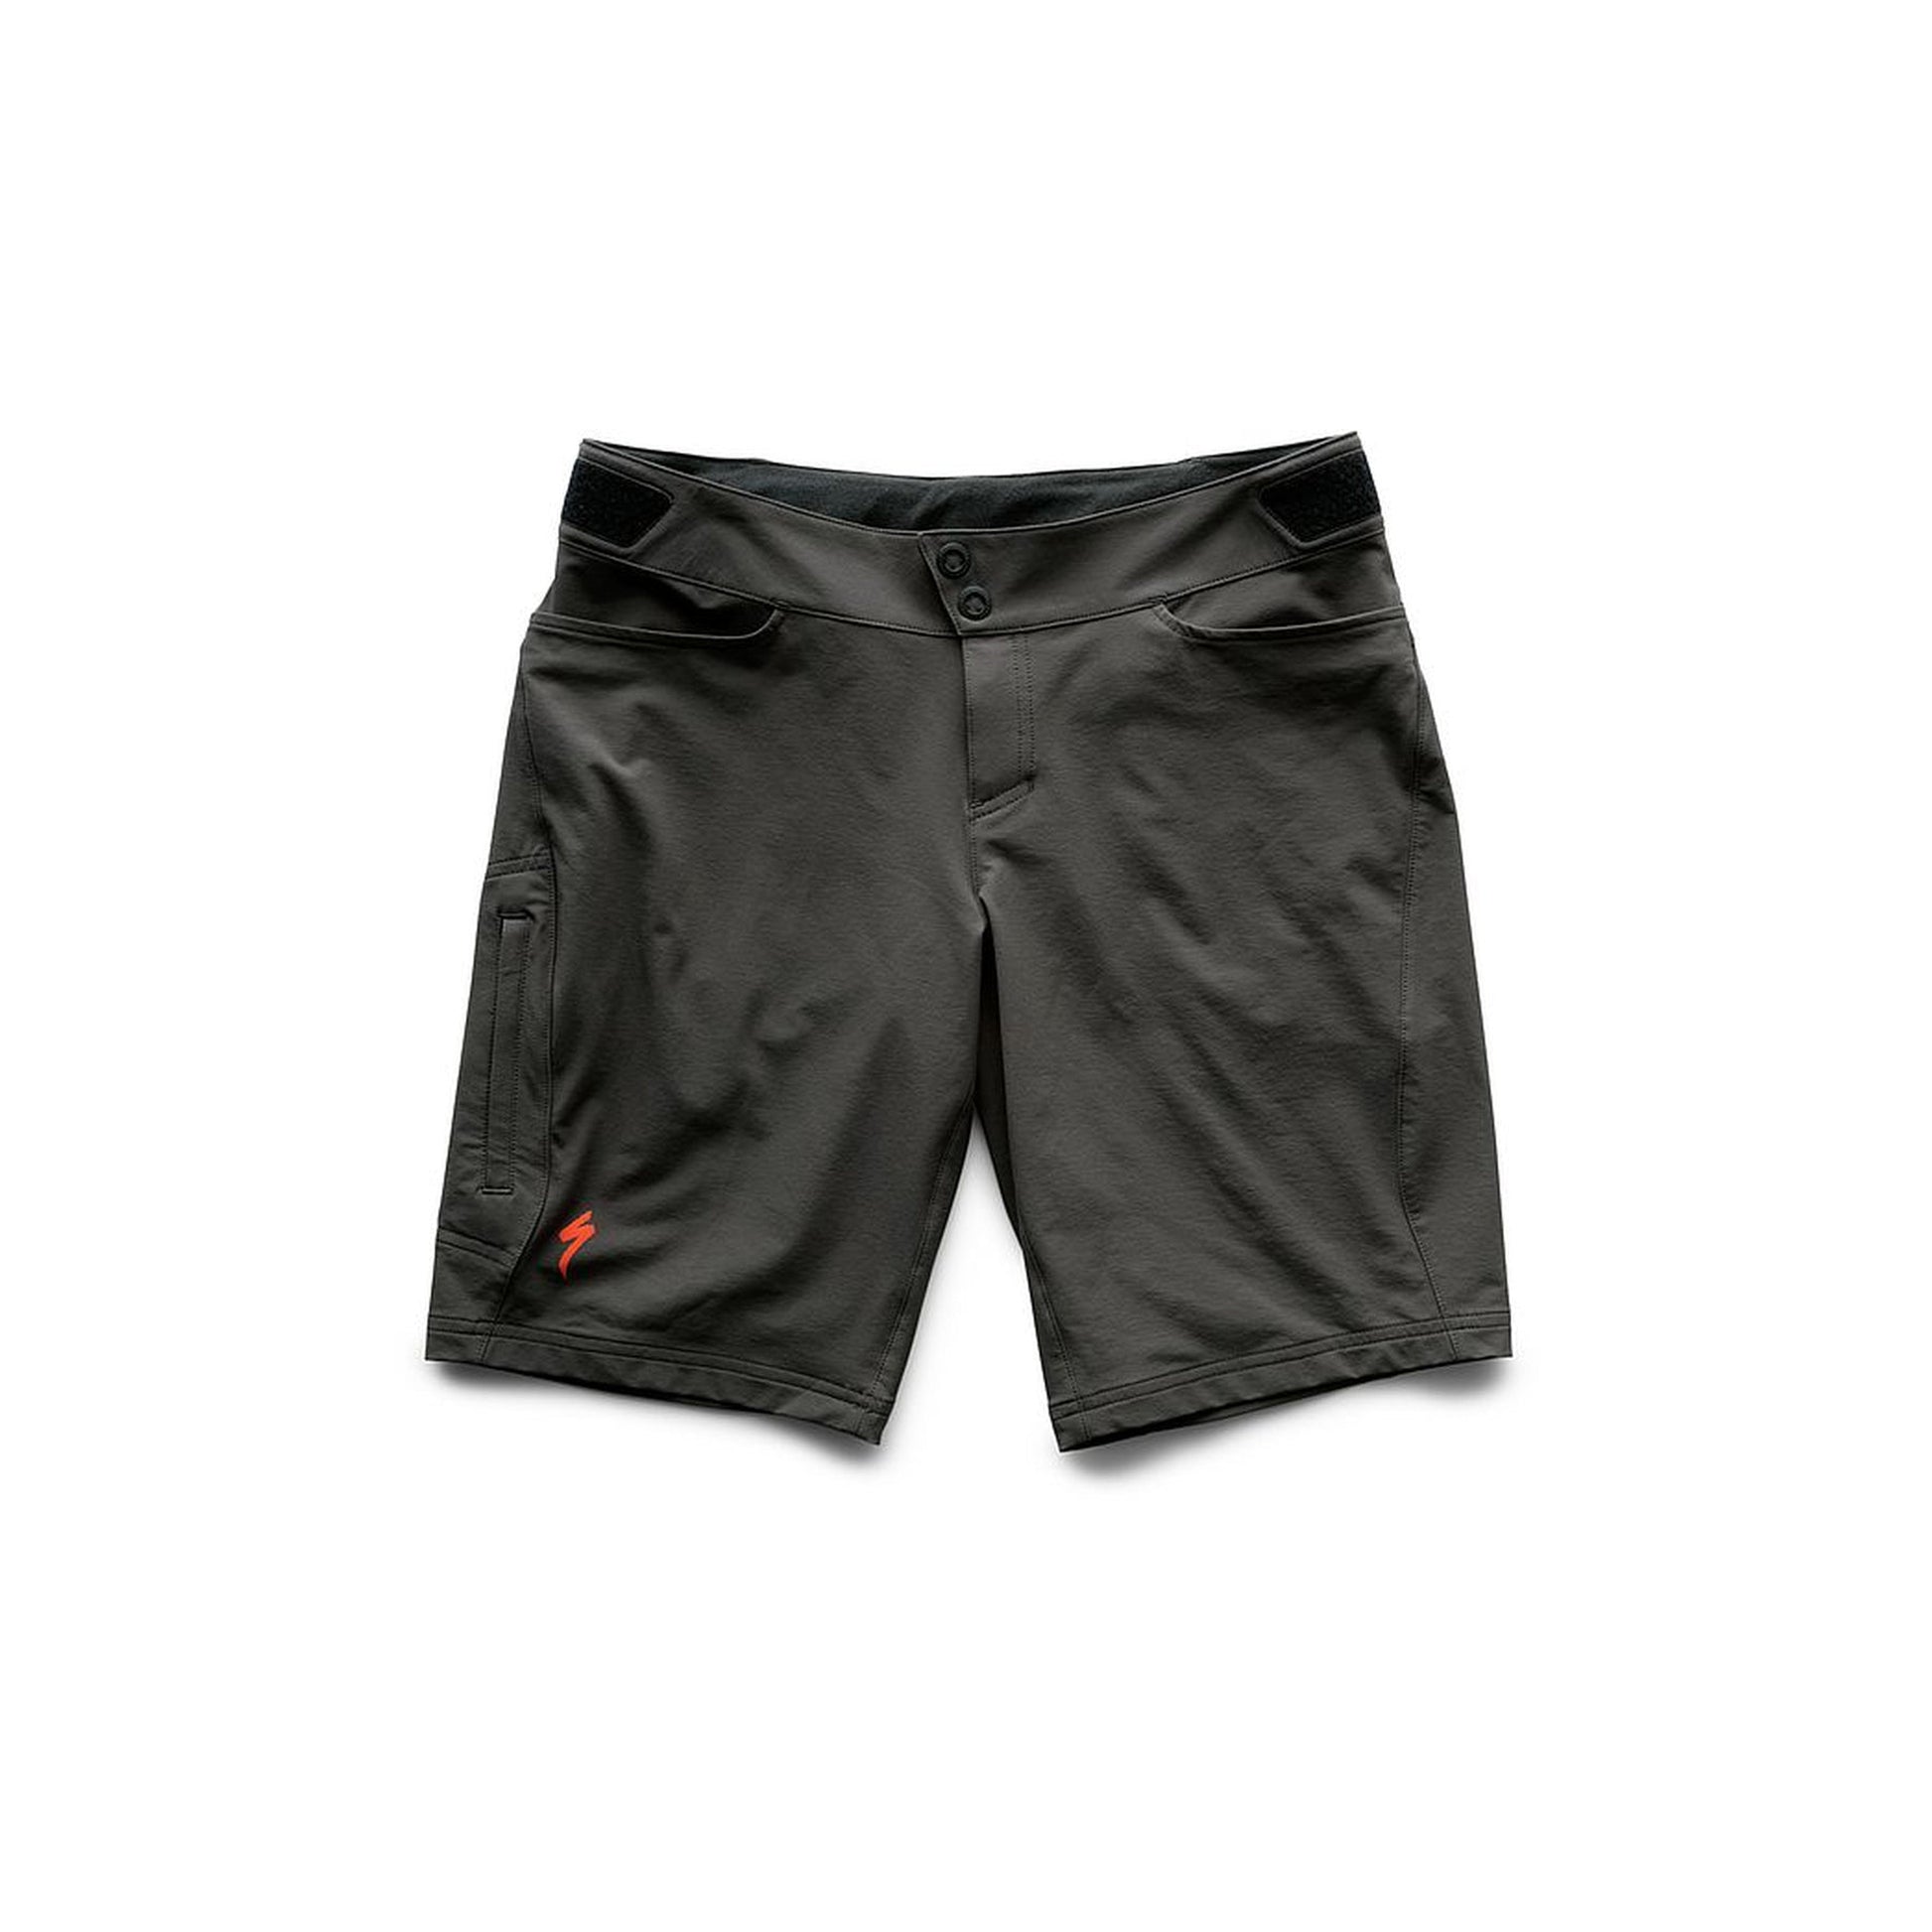 Andorra Comp Shorts-Bells-Cycling-Specialized